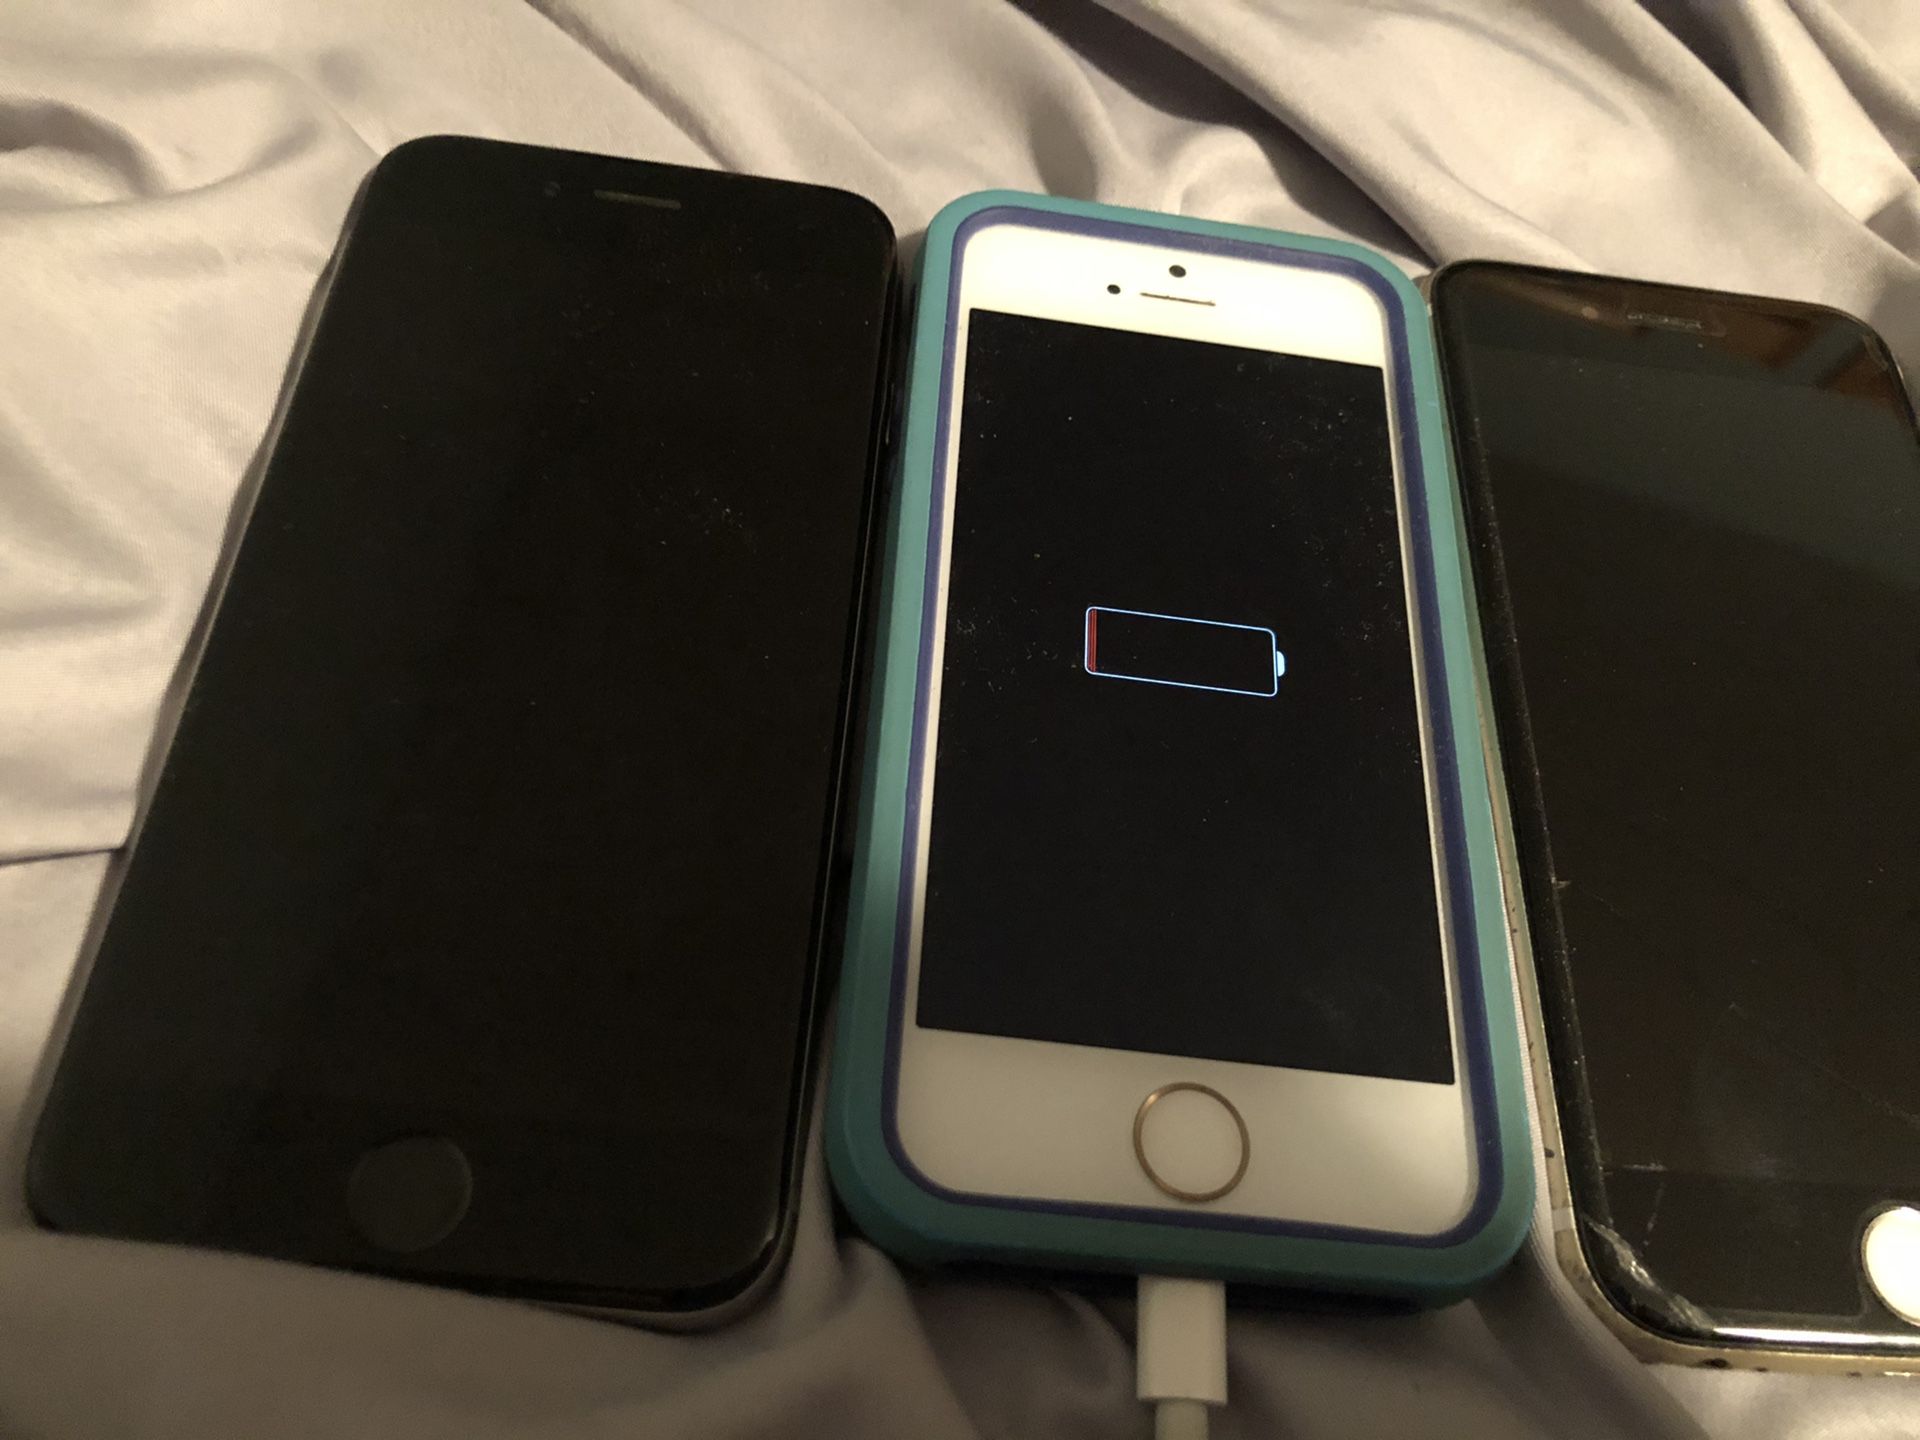 IPHONE 7 IPHONE 6S IPHONE 5 OLD PHONES DONT NEED ANYMORE